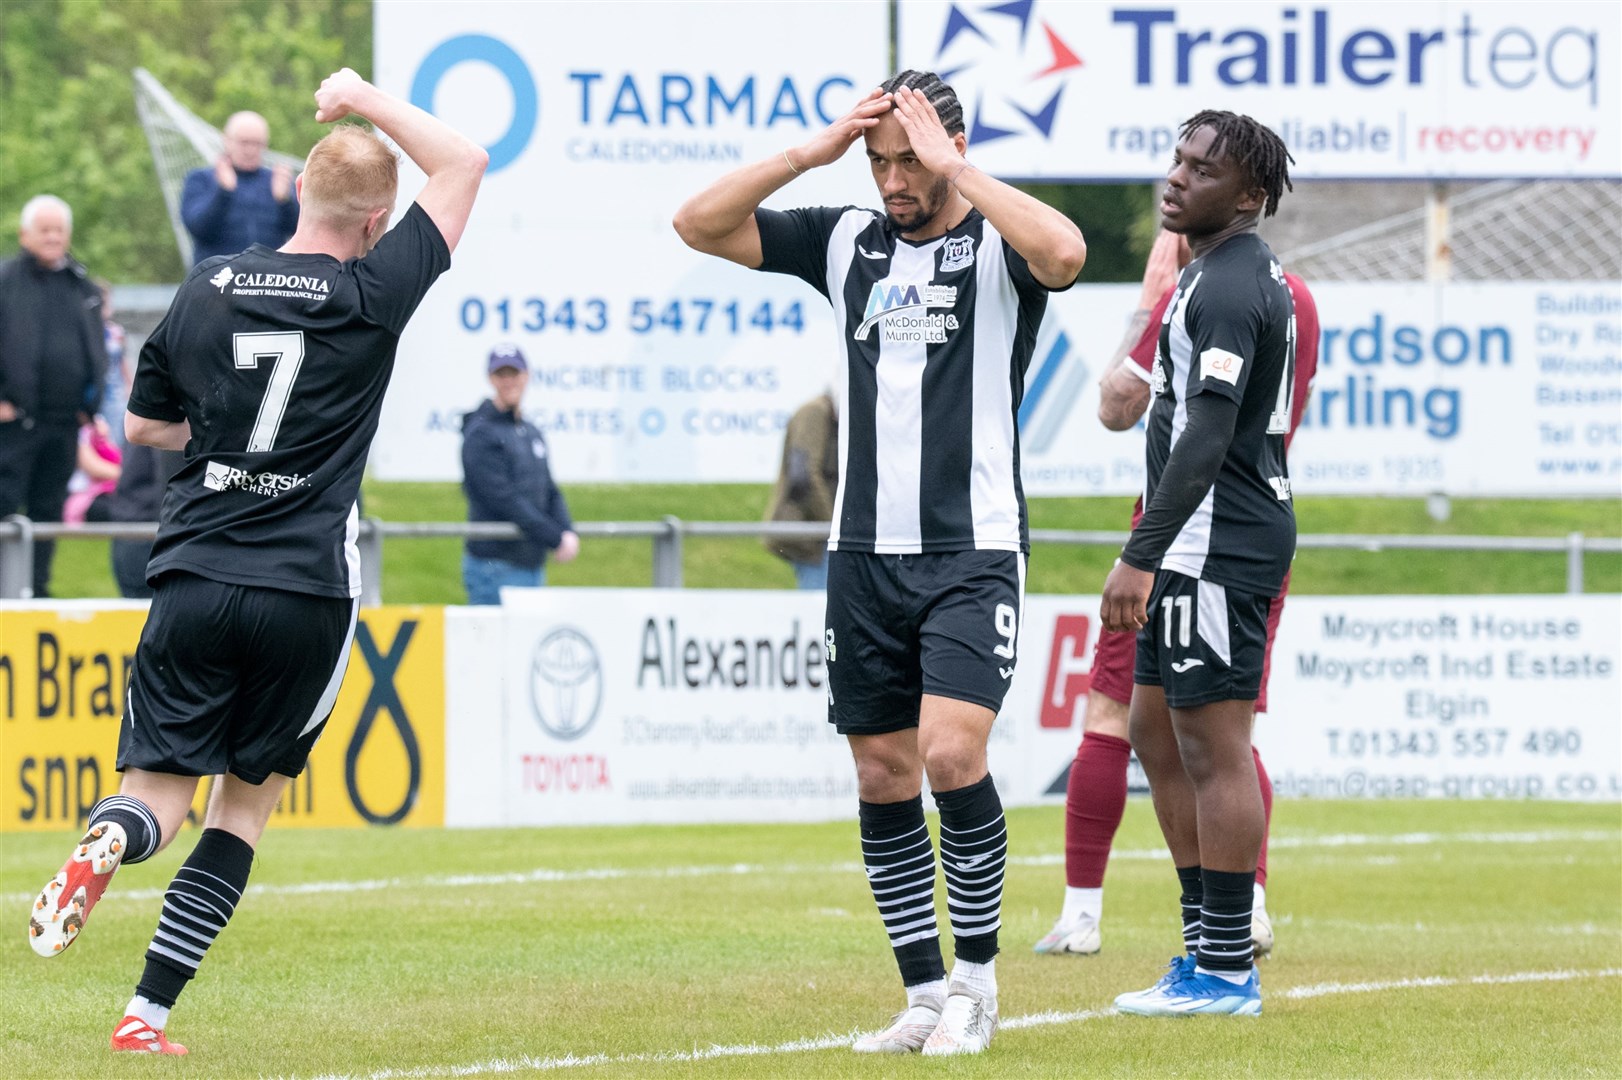 Not Elgin's day as another chance is missed. Elgin City FC (0) vs Clyde FC (3) - Scottish League Two 23/24 - Borough Briggs, Elgin 4/5/2024.Picture: Daniel Forsyth.